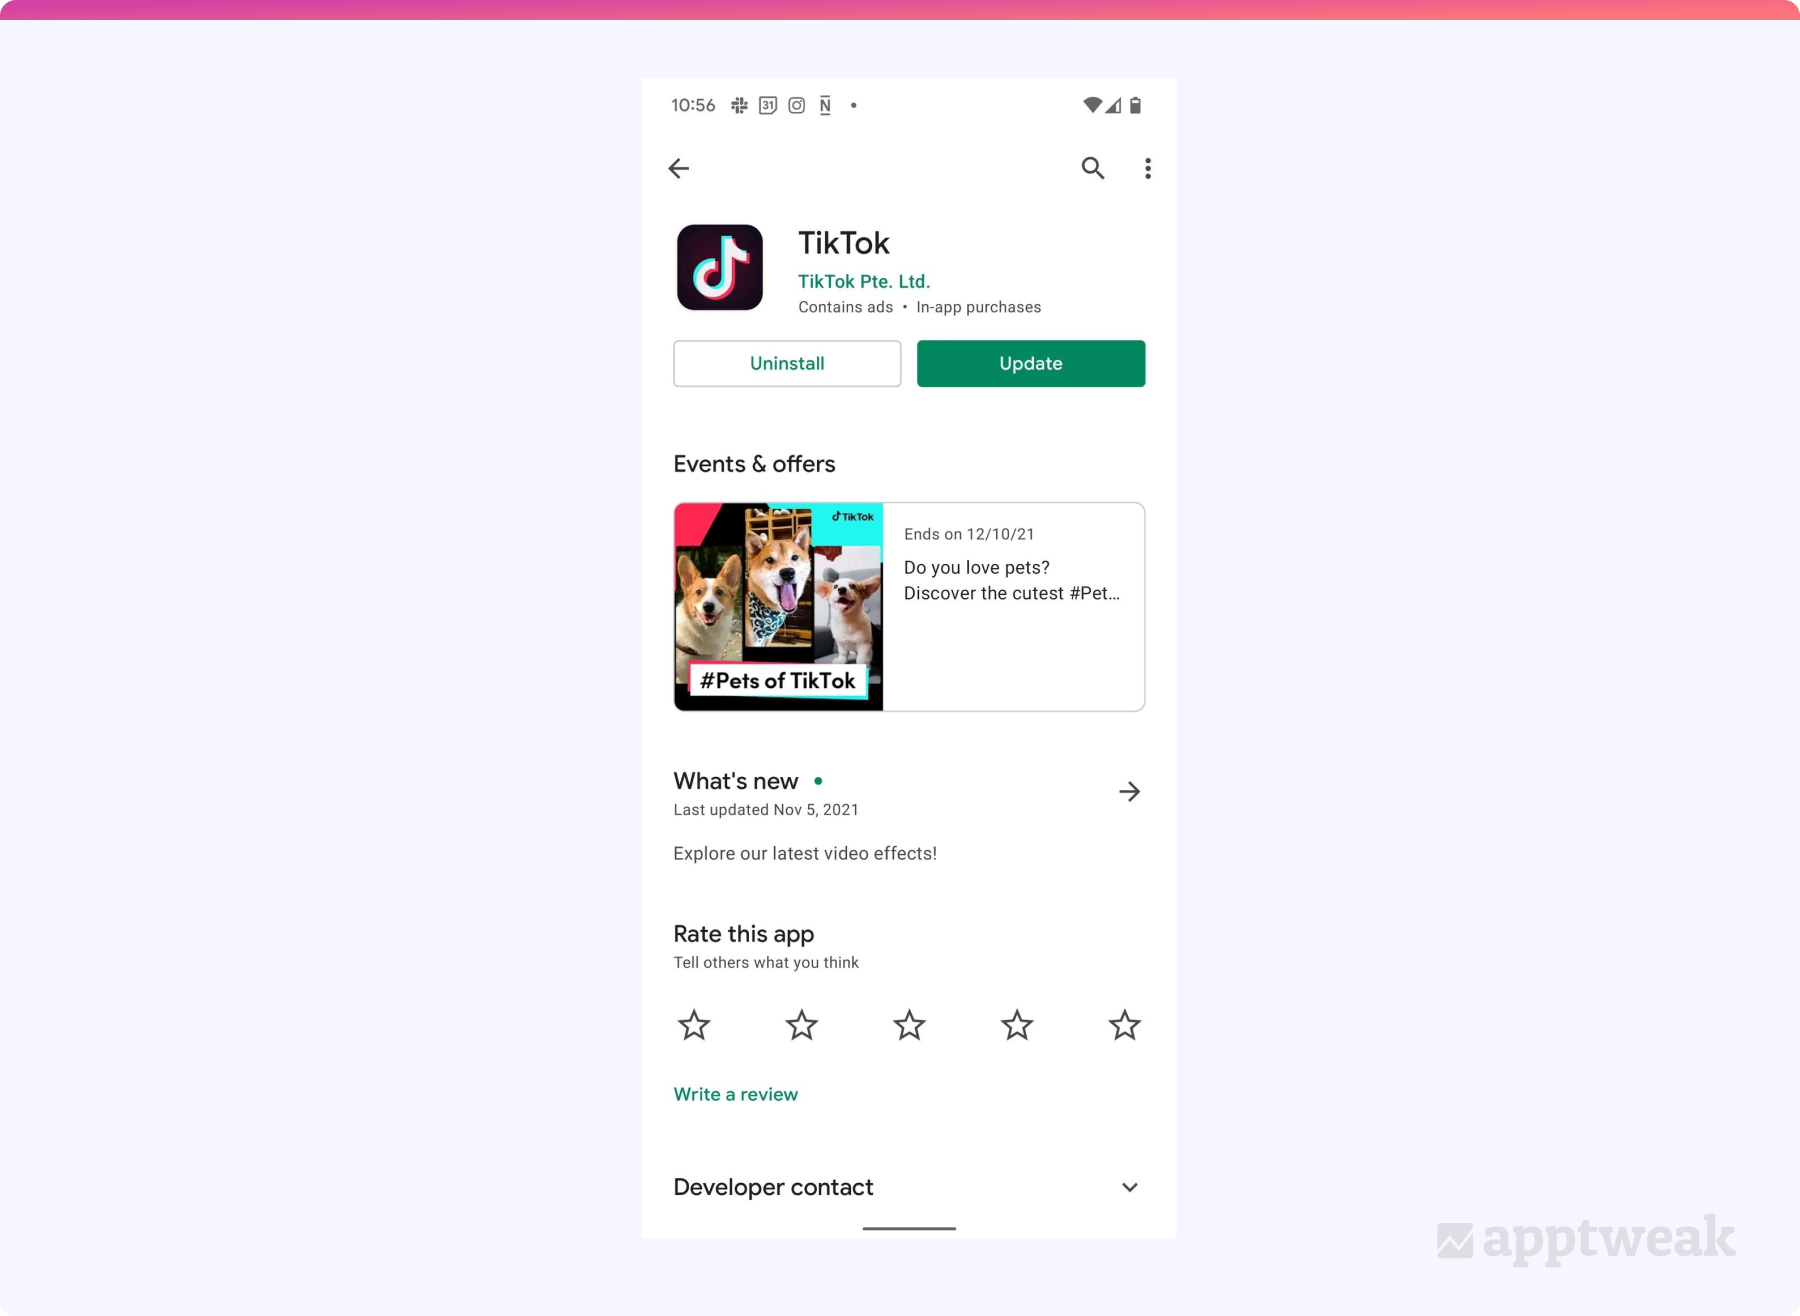 TikTok was among the first apps spotted using LiveOps on Google Play in December 2021.